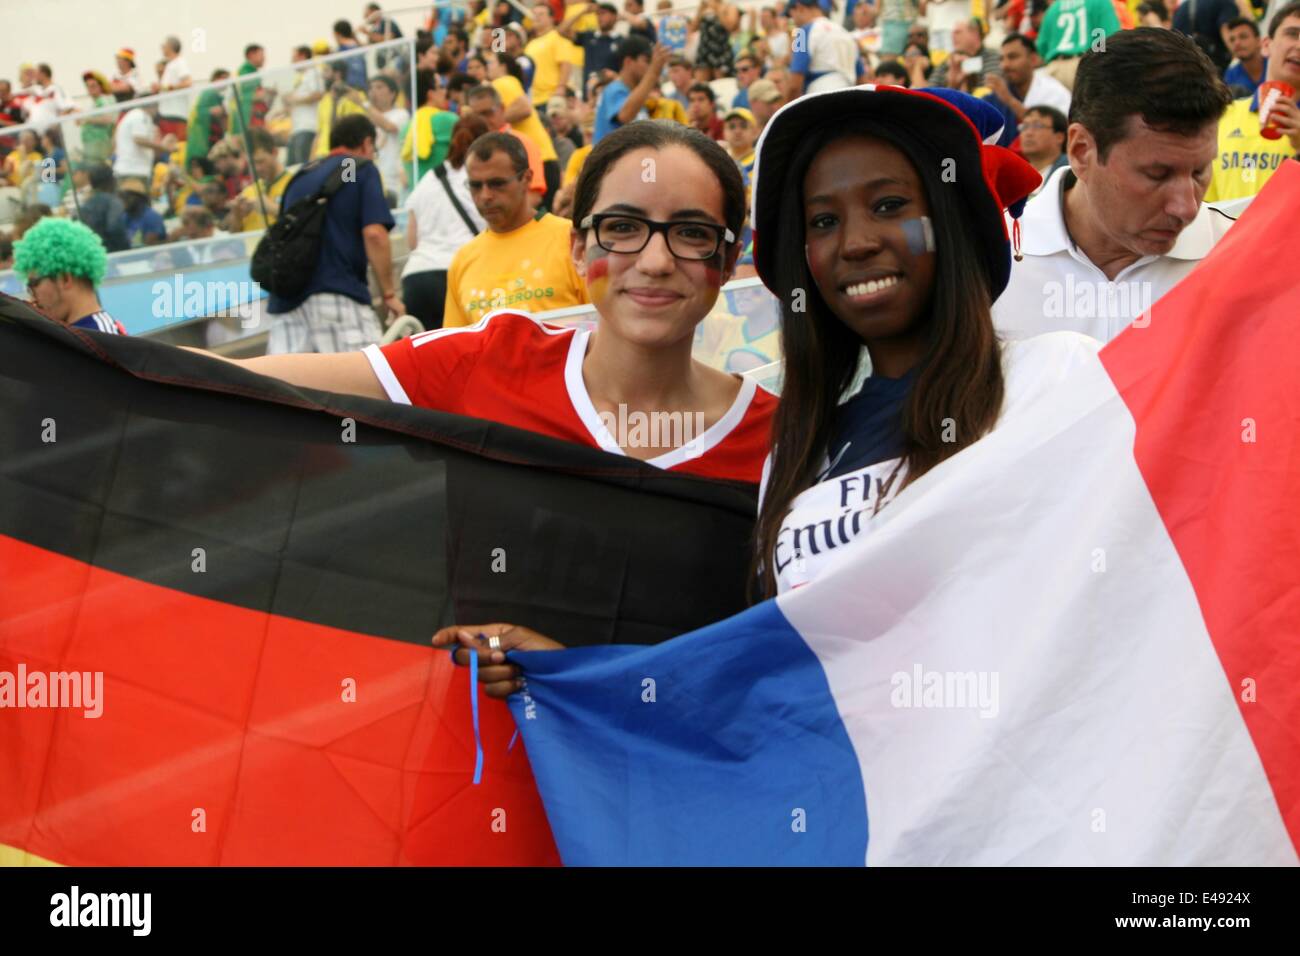 2014 FIFA World Cup Brazil. German and French fans at Maracanã in the quarterfinals match France 0-1 Germany. Rio de Janeiro, Brazil, 4th July, 2014. Stock Photo